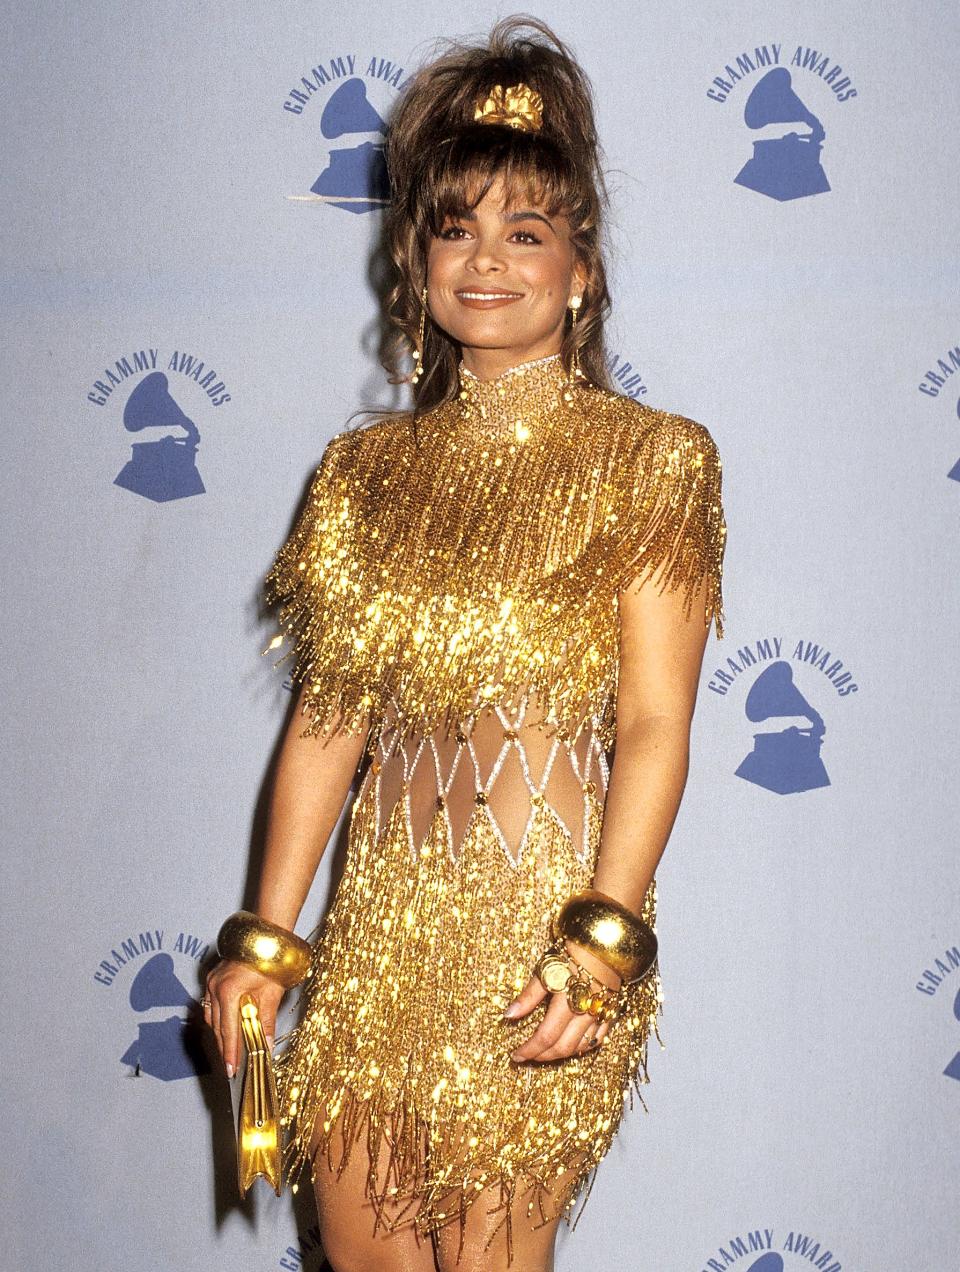 Go For Gold in a Paula Abdul-Inspired Look 